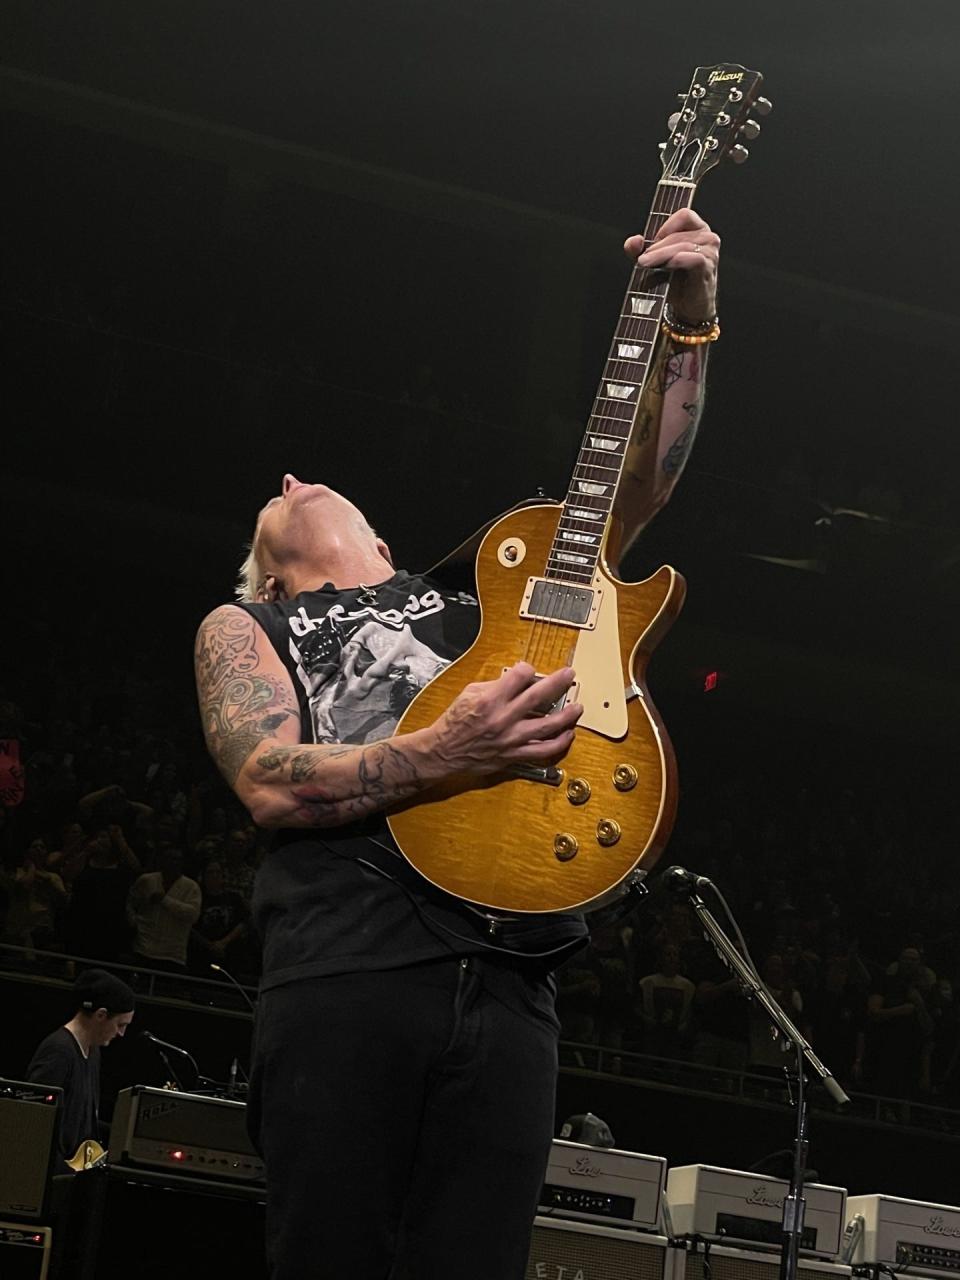 Pearl Jam lead guitarist Mike McCready performs during the band's second of two Austin concerts on Tuesday night at Moody Center. The show concluded a nine-concert mini-tour that ended the group's Gigaton tour.